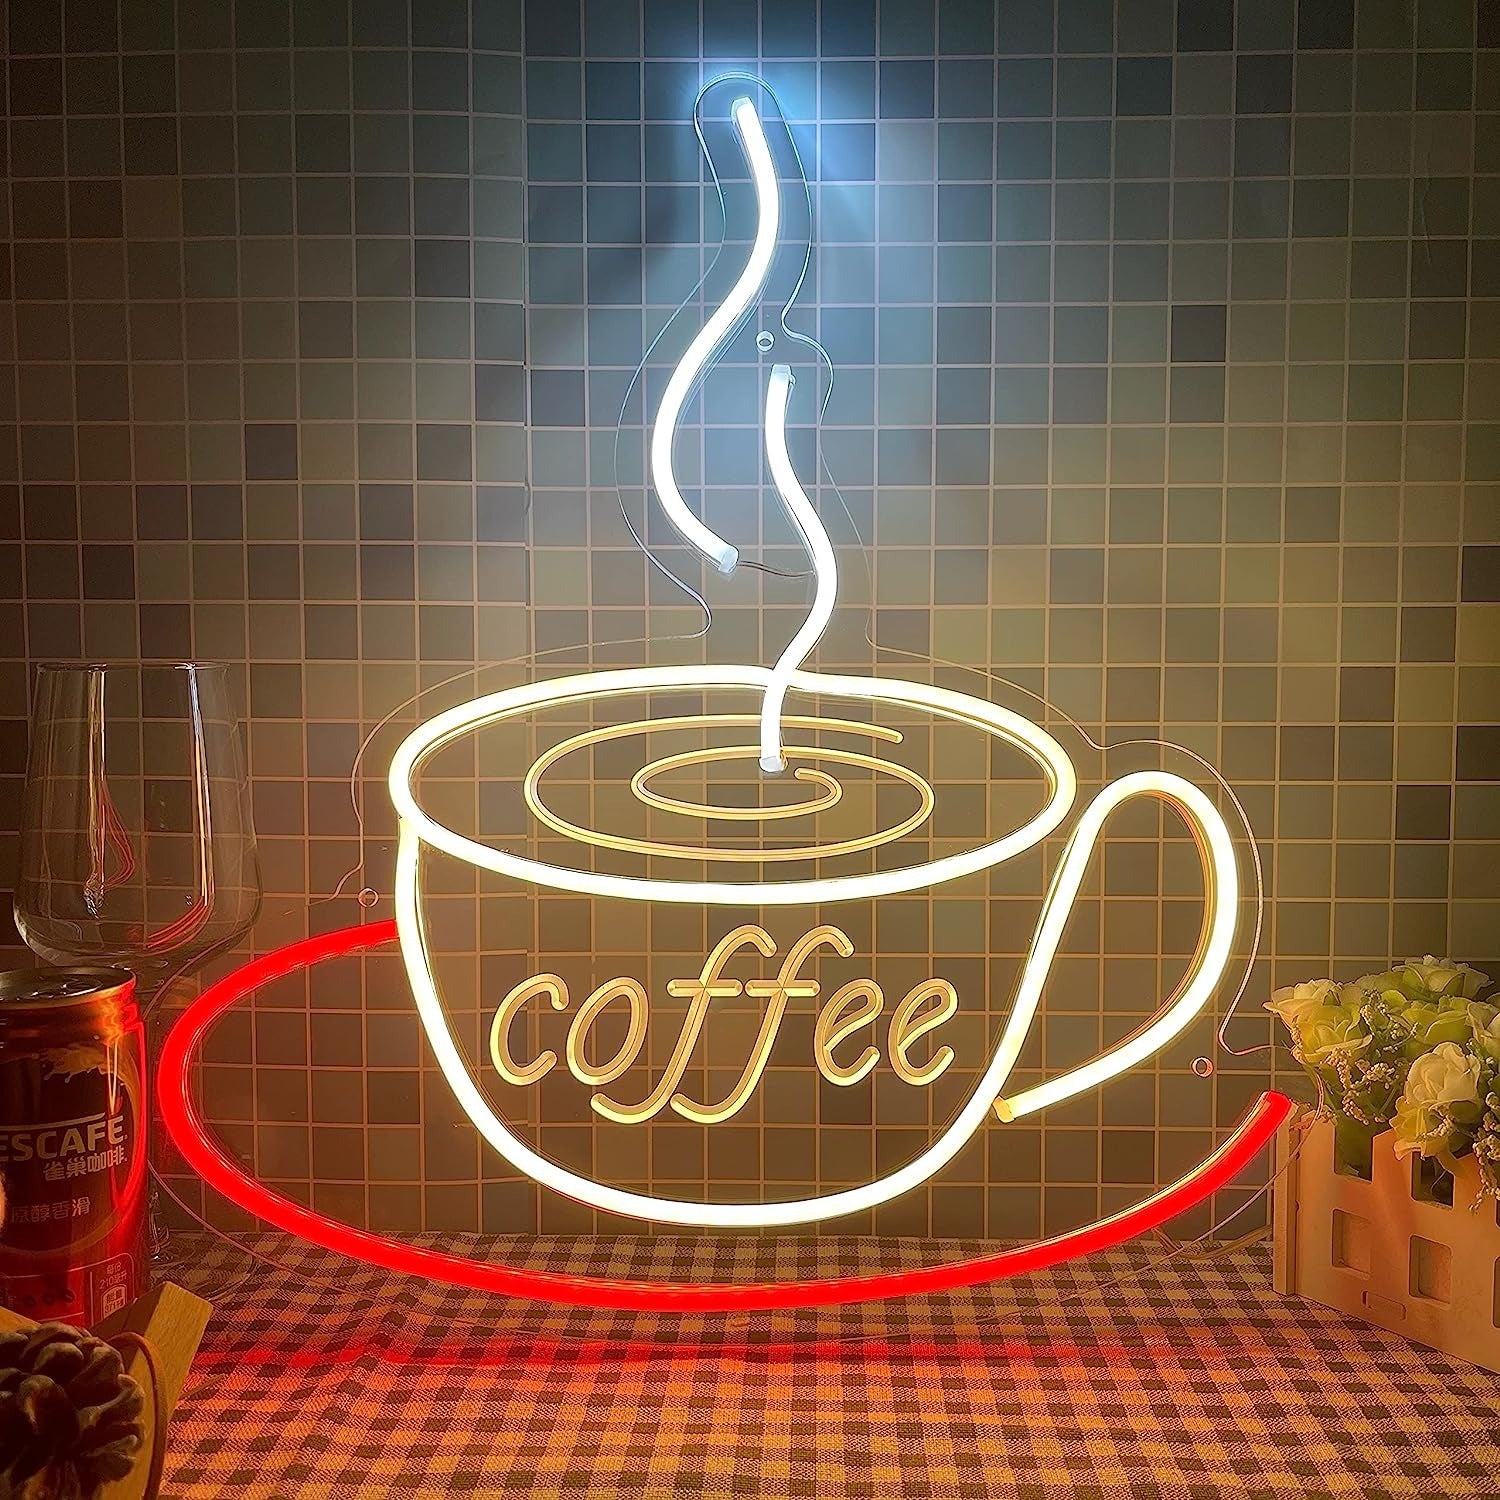 Neon coffee lights offer captivating designs